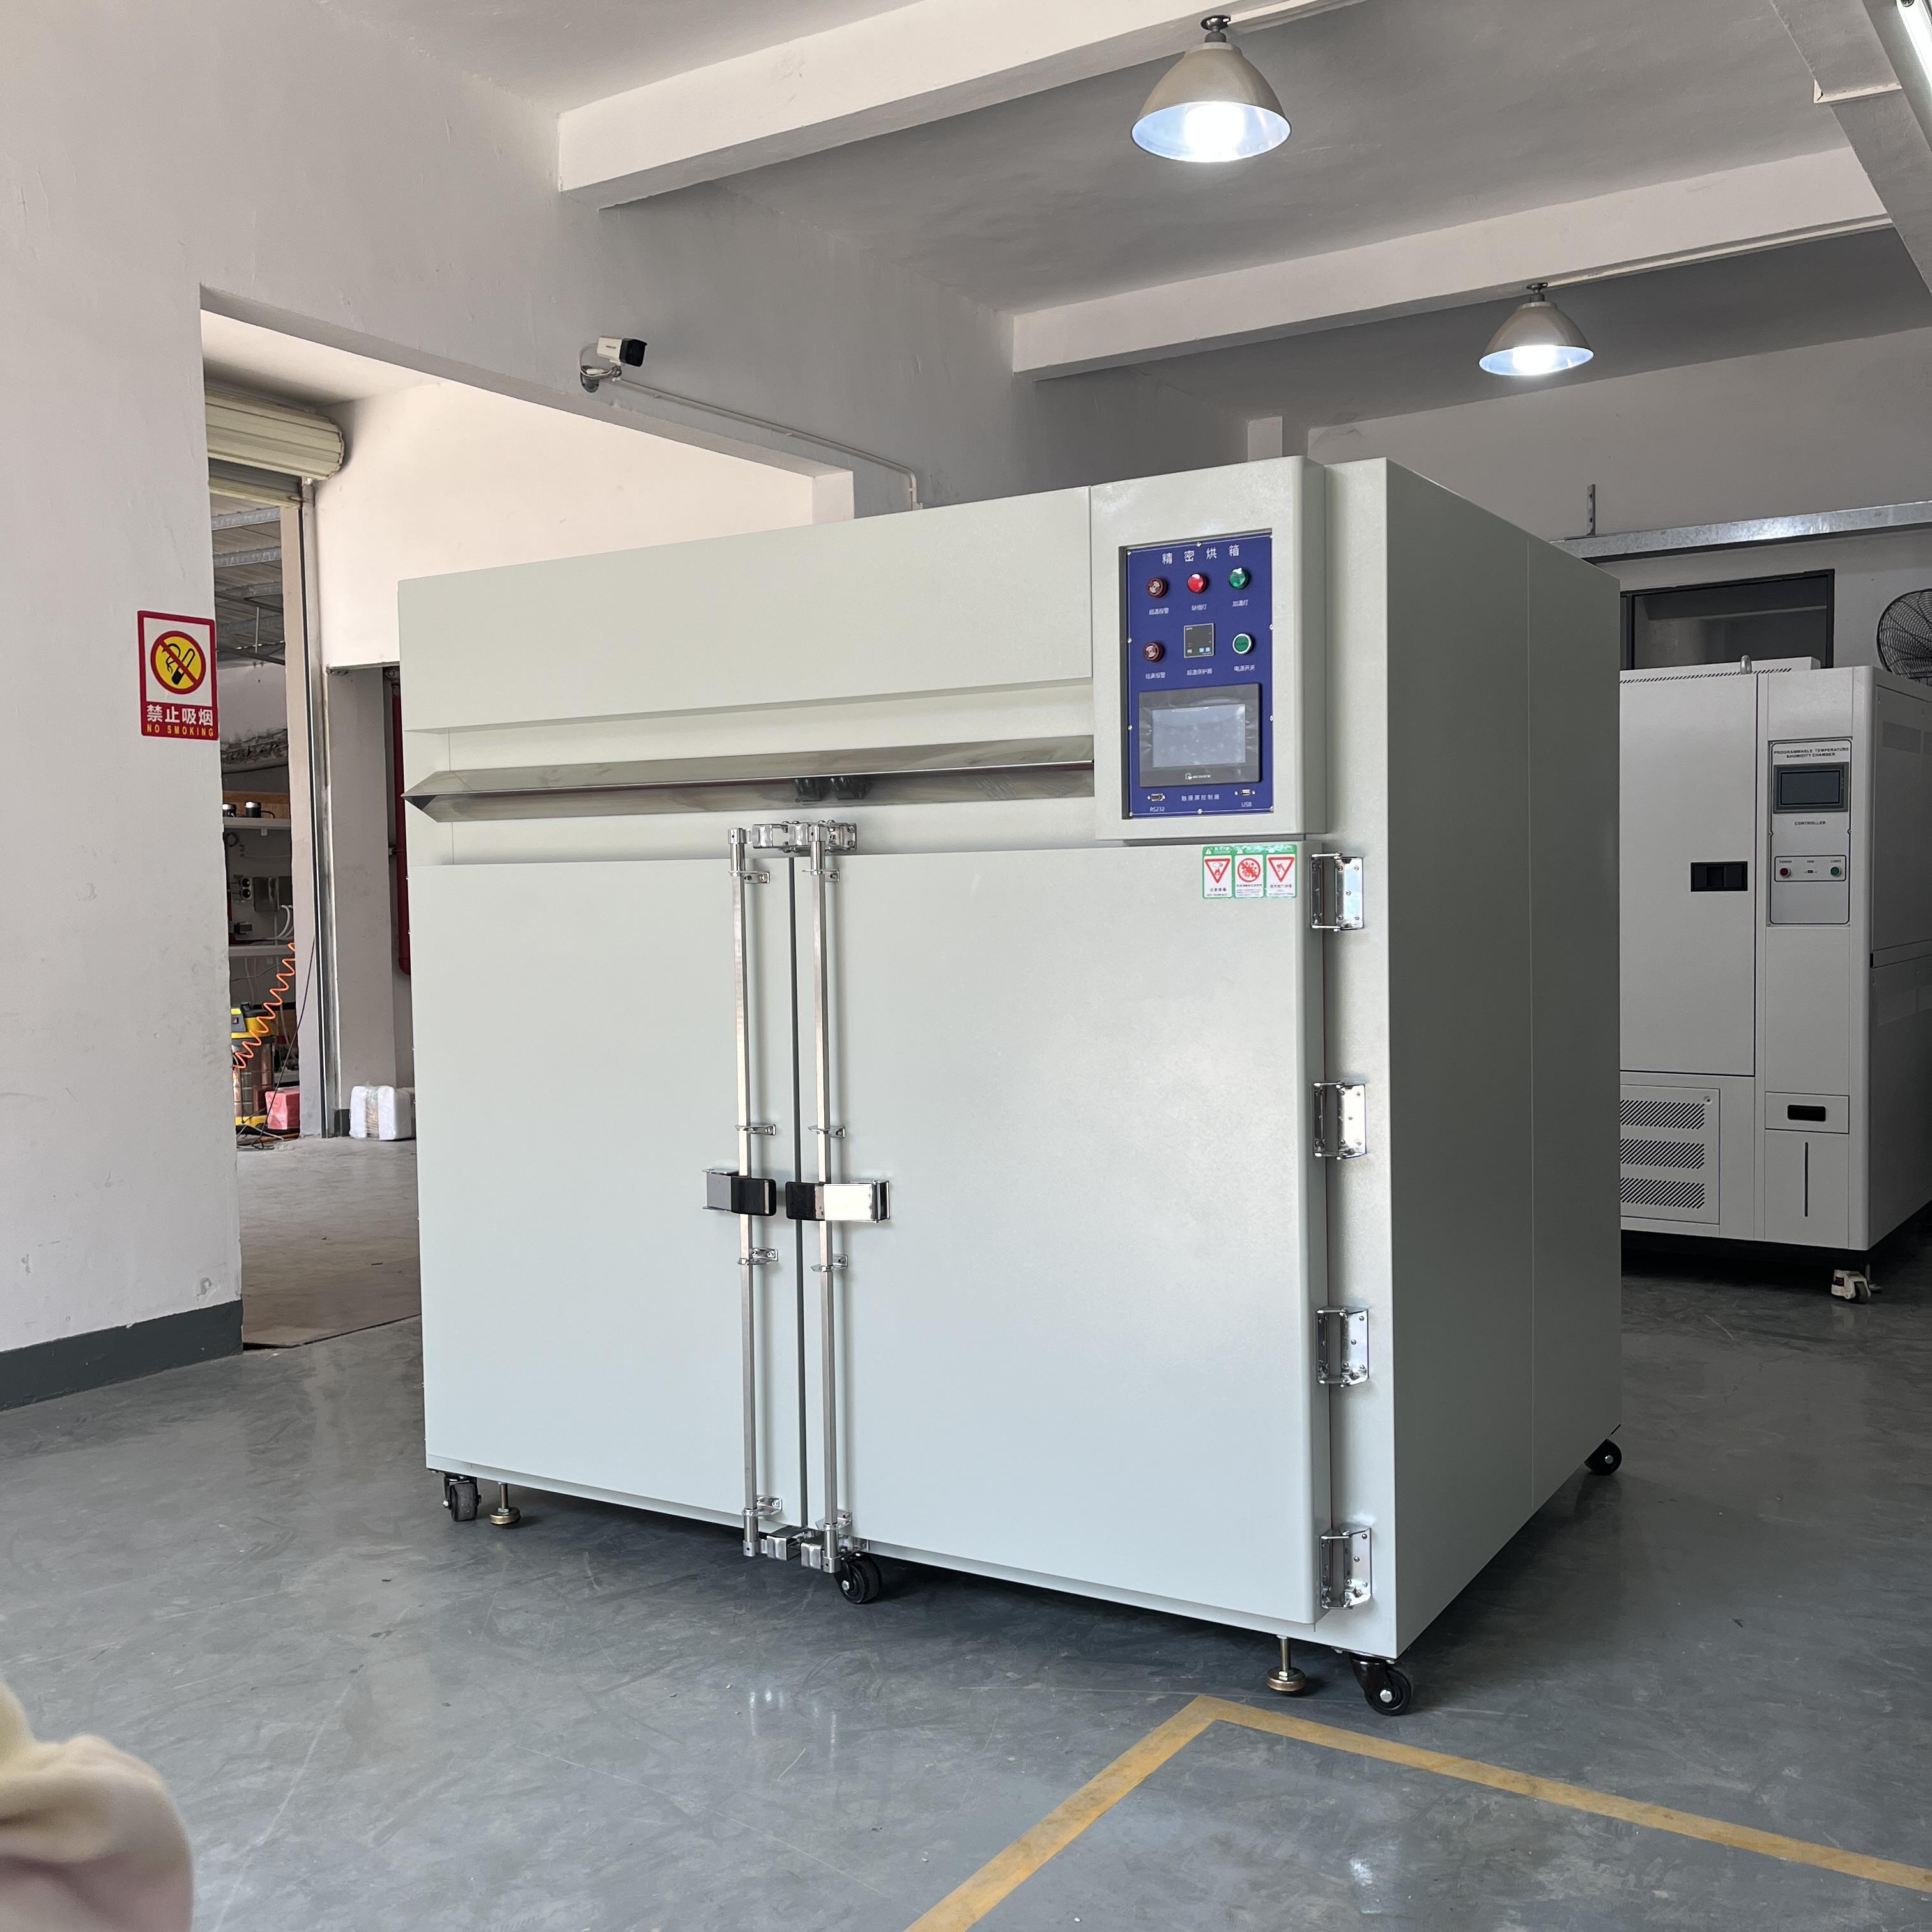 ODM OEM Customized Hot Air Circulating Drying Industrial Ovens Manufacturer